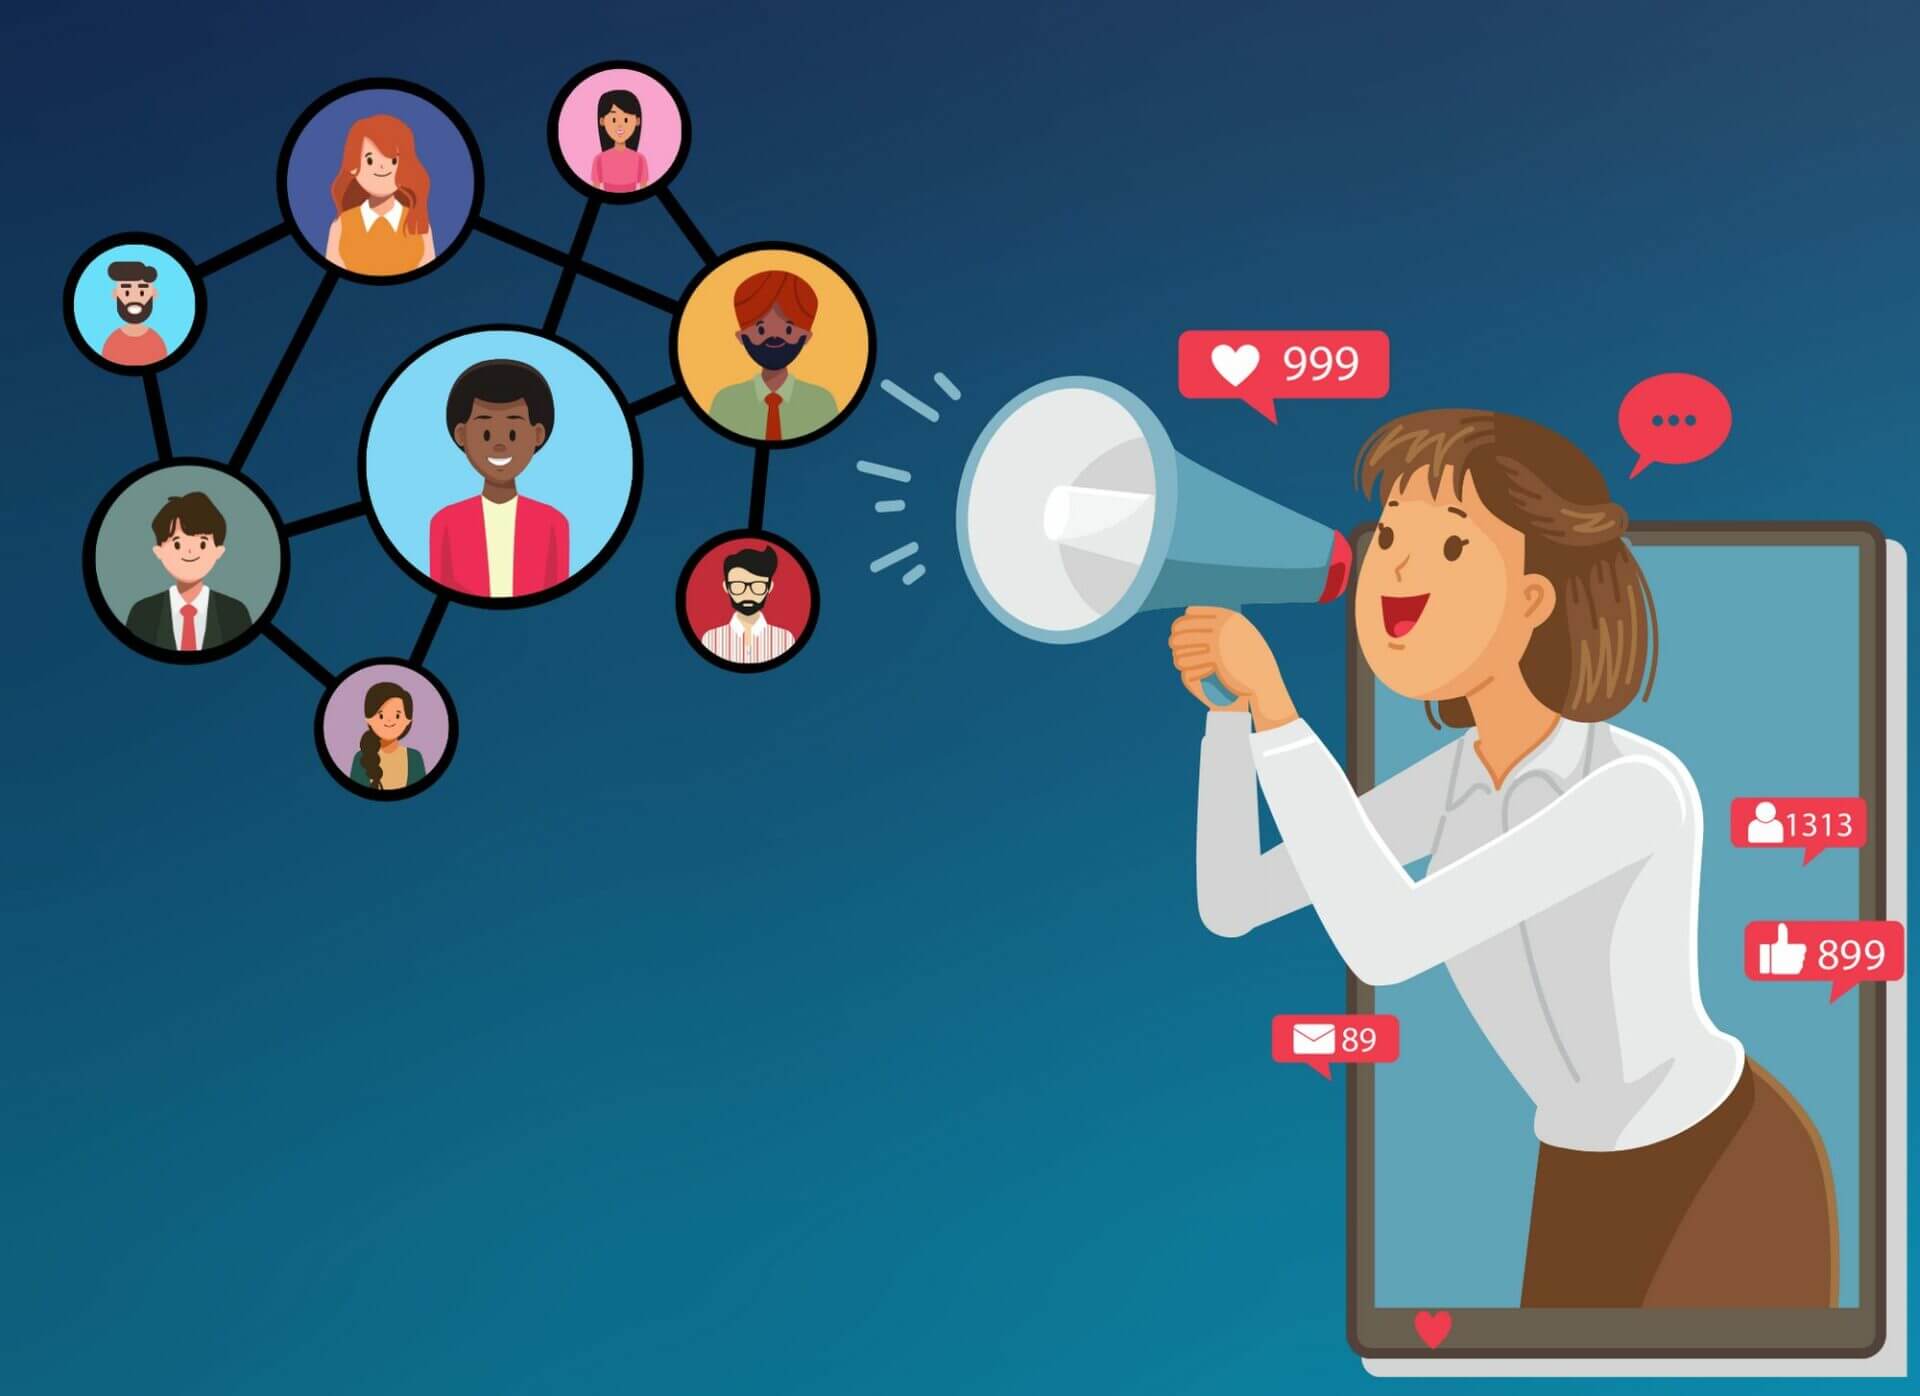 Illustration depicting a woman advertising job positions to potential candidates on social media